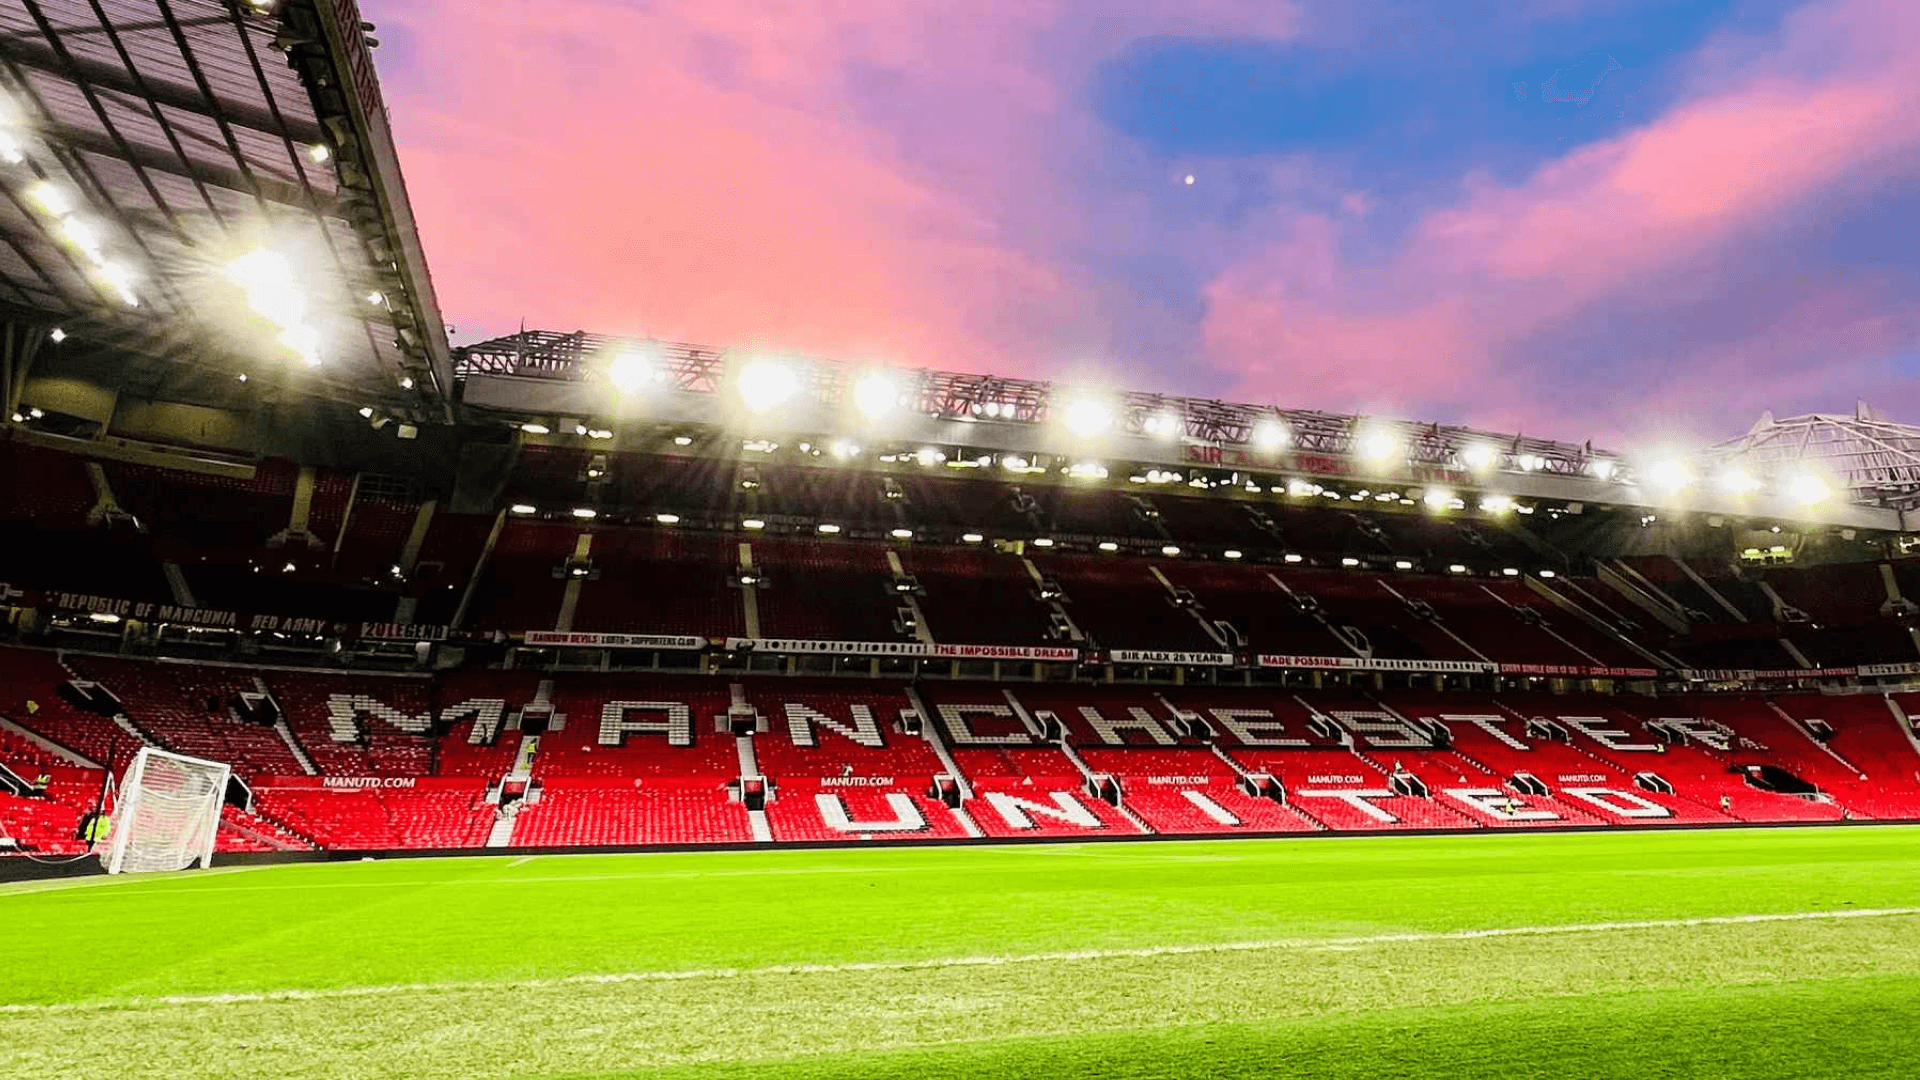 Old Trafford, Manchester United